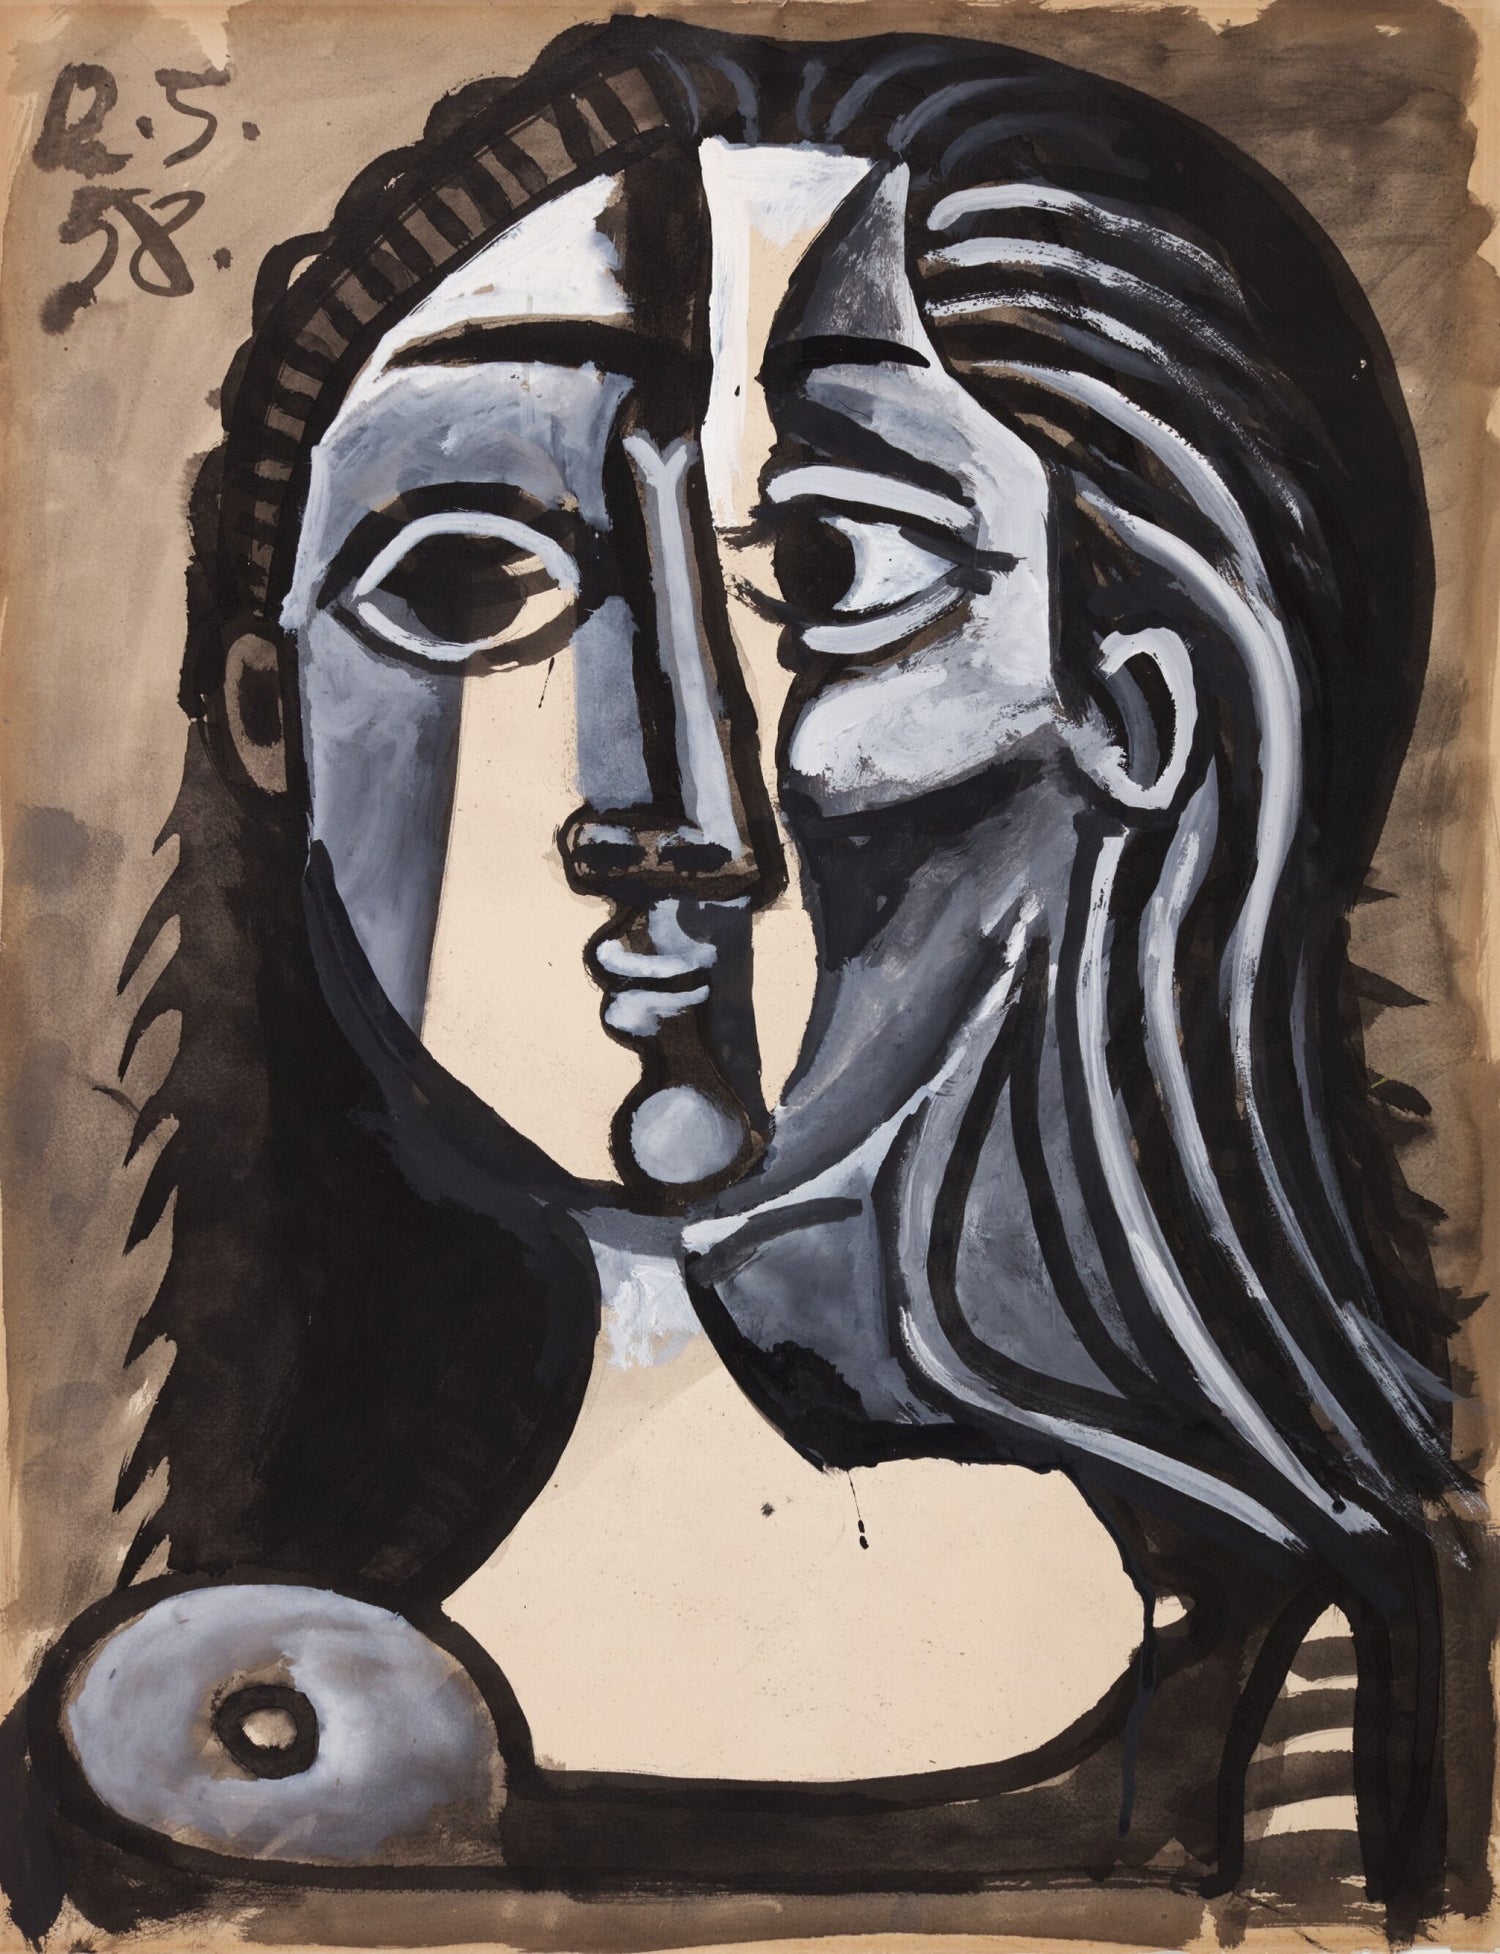 View All Pablo Picasso